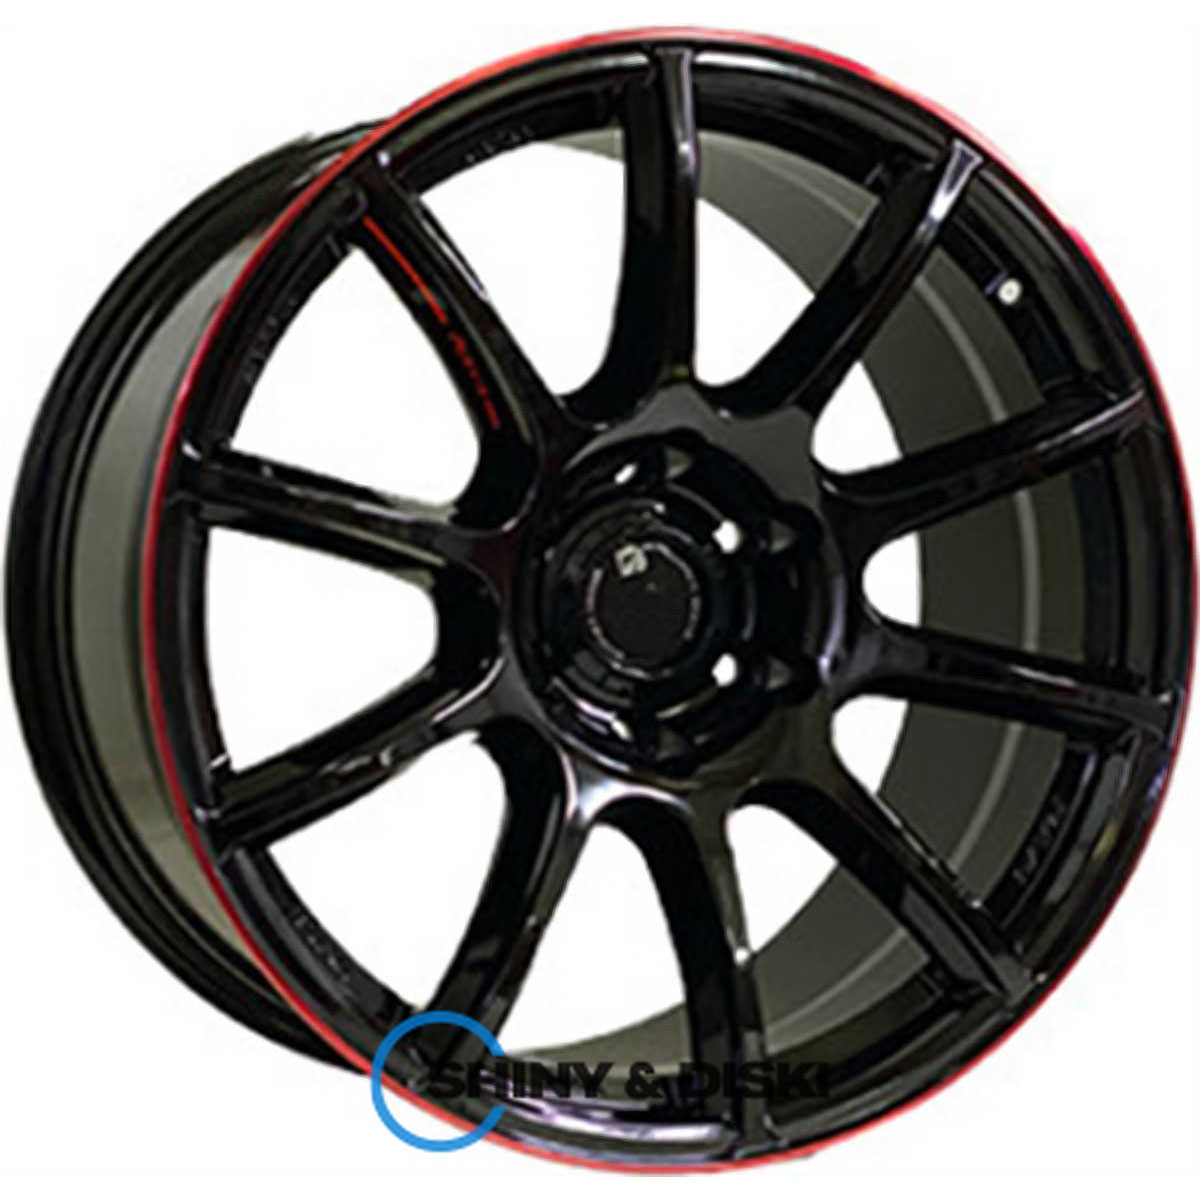 off road wheels ow1012 glossy black red line riva red